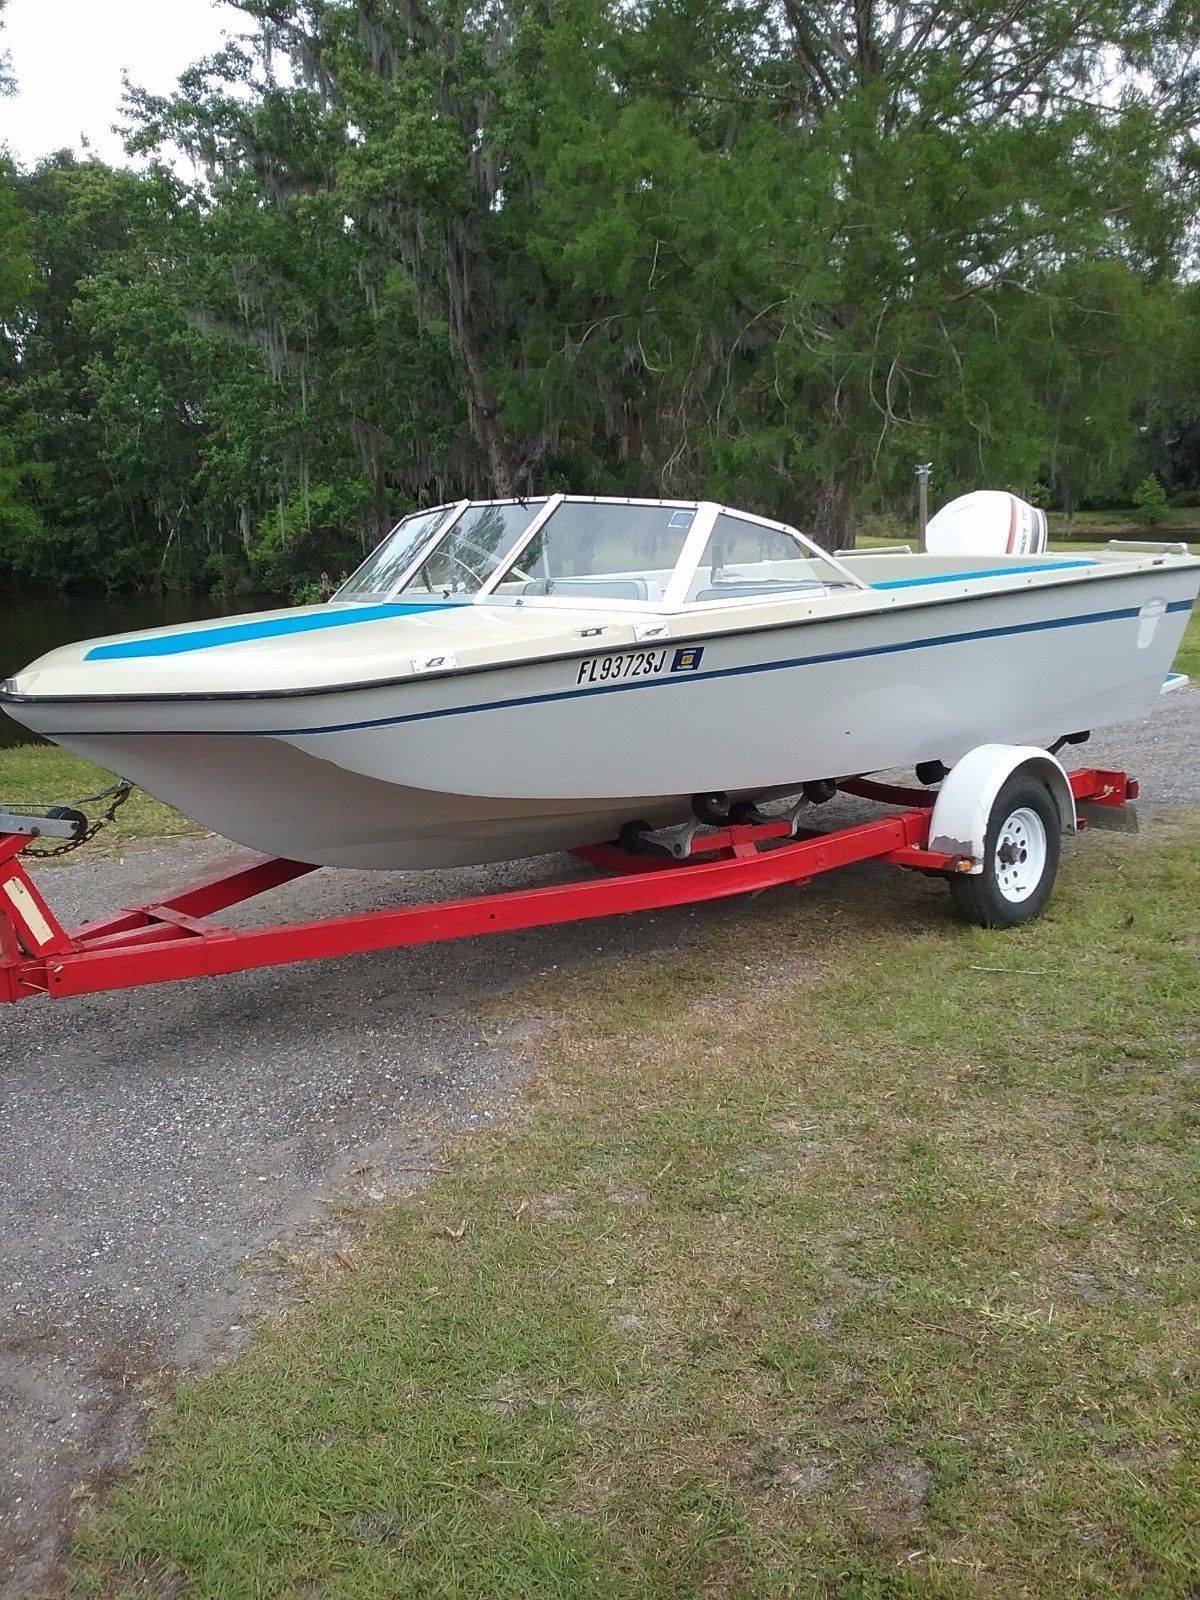 Switzer Craft Ski Boat 1983 For Sale For 100 Boats From 5573